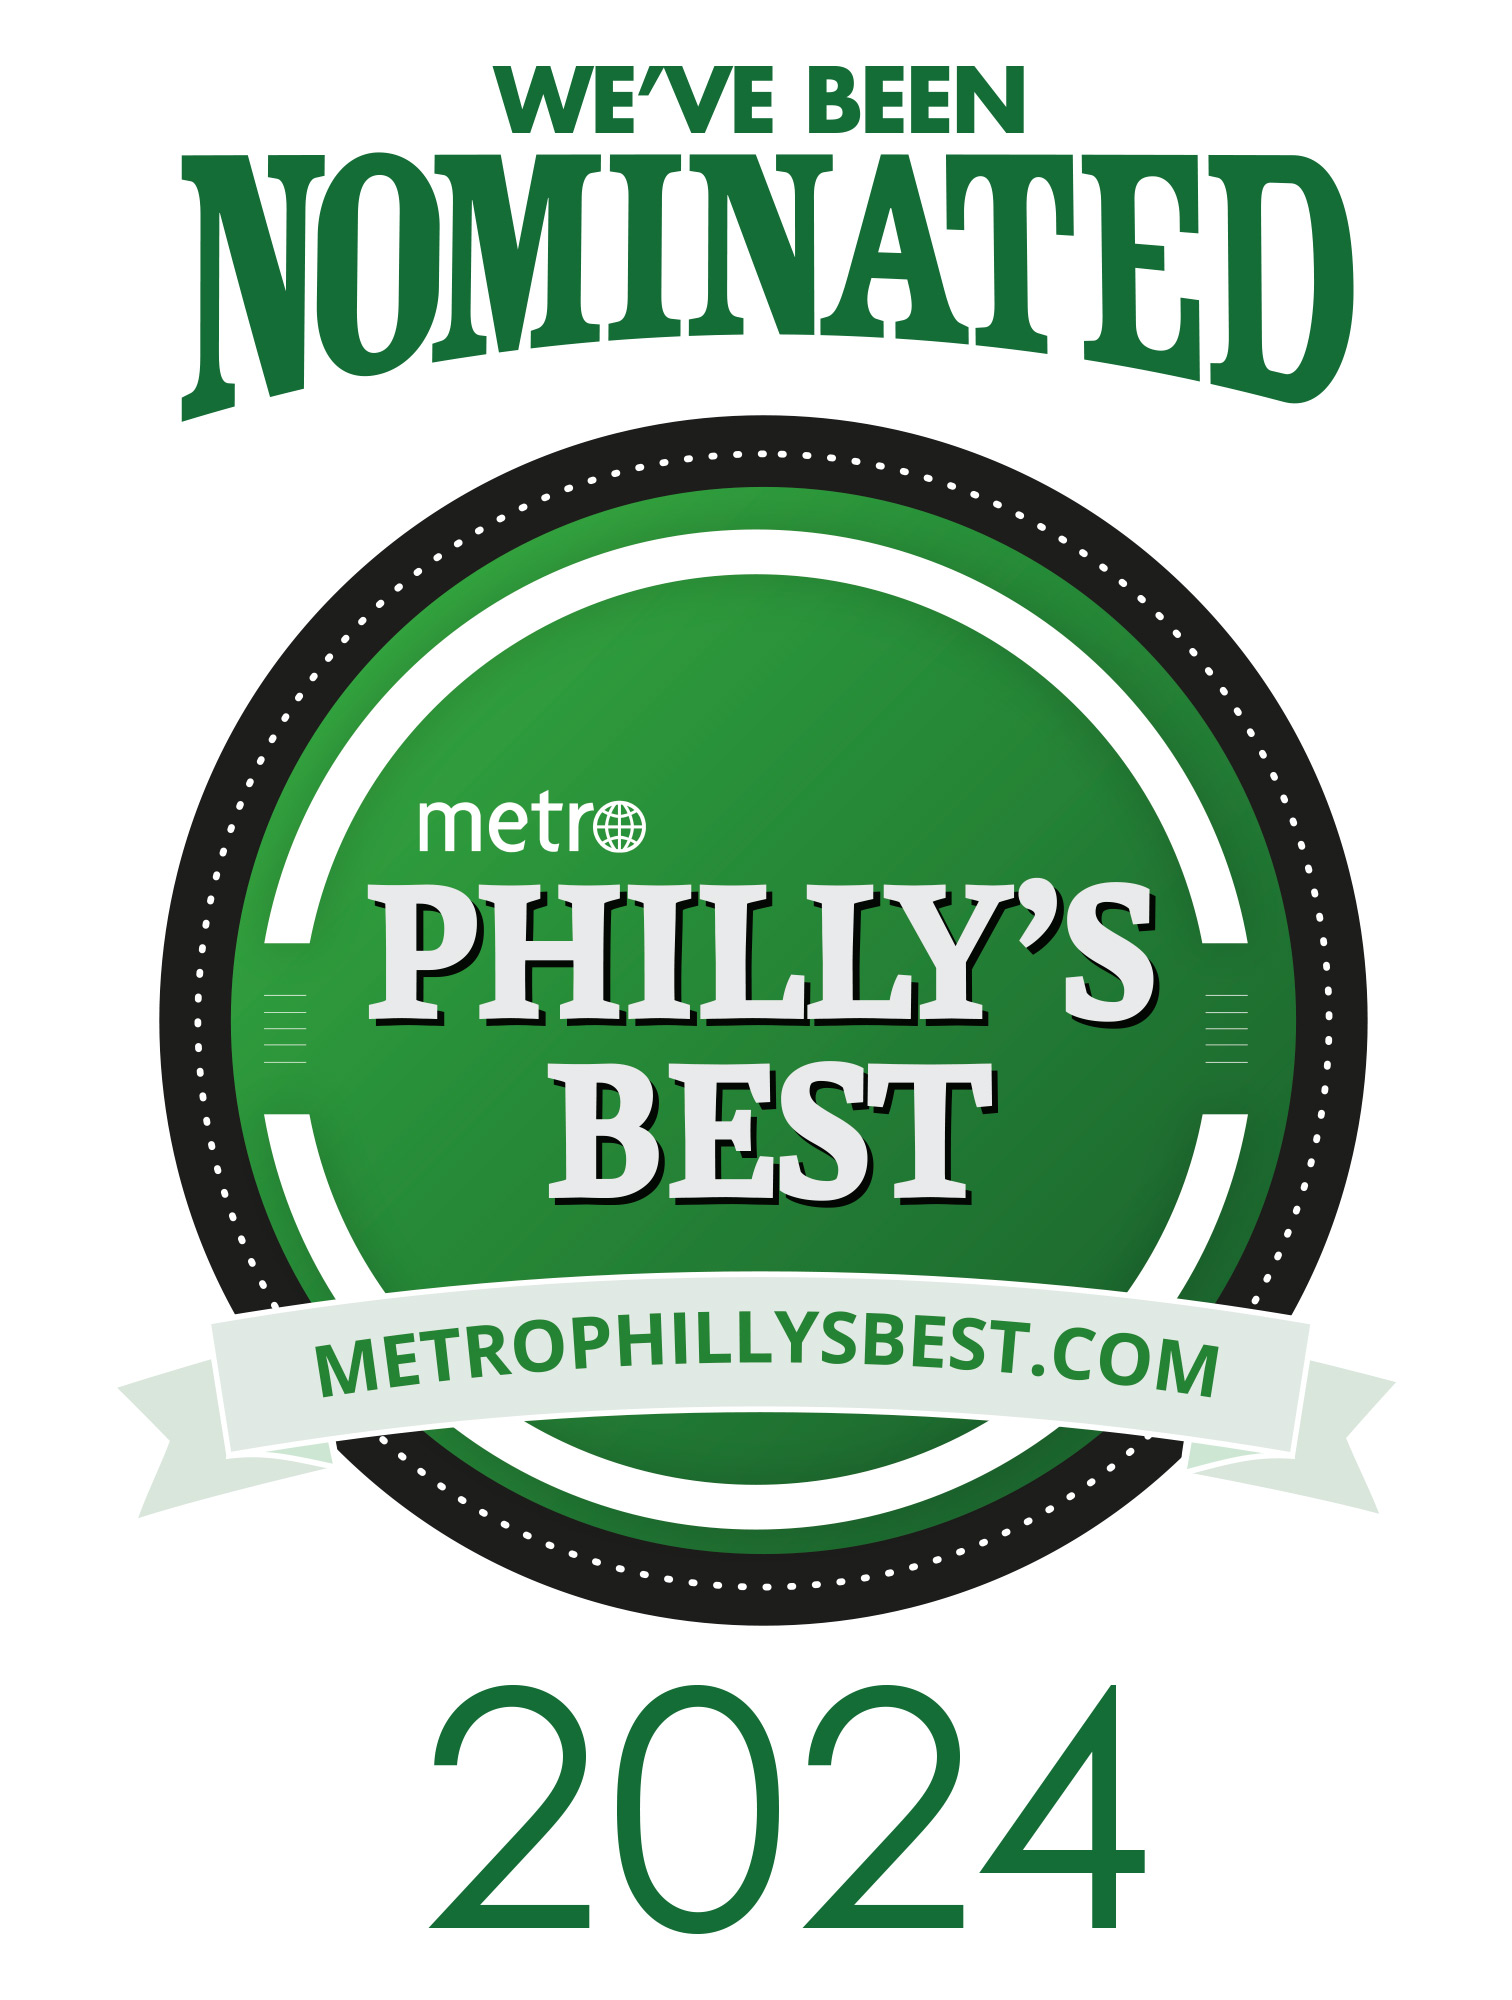 Fashion District Philadelphia nomination for Metro Philly's Best Mall 2024